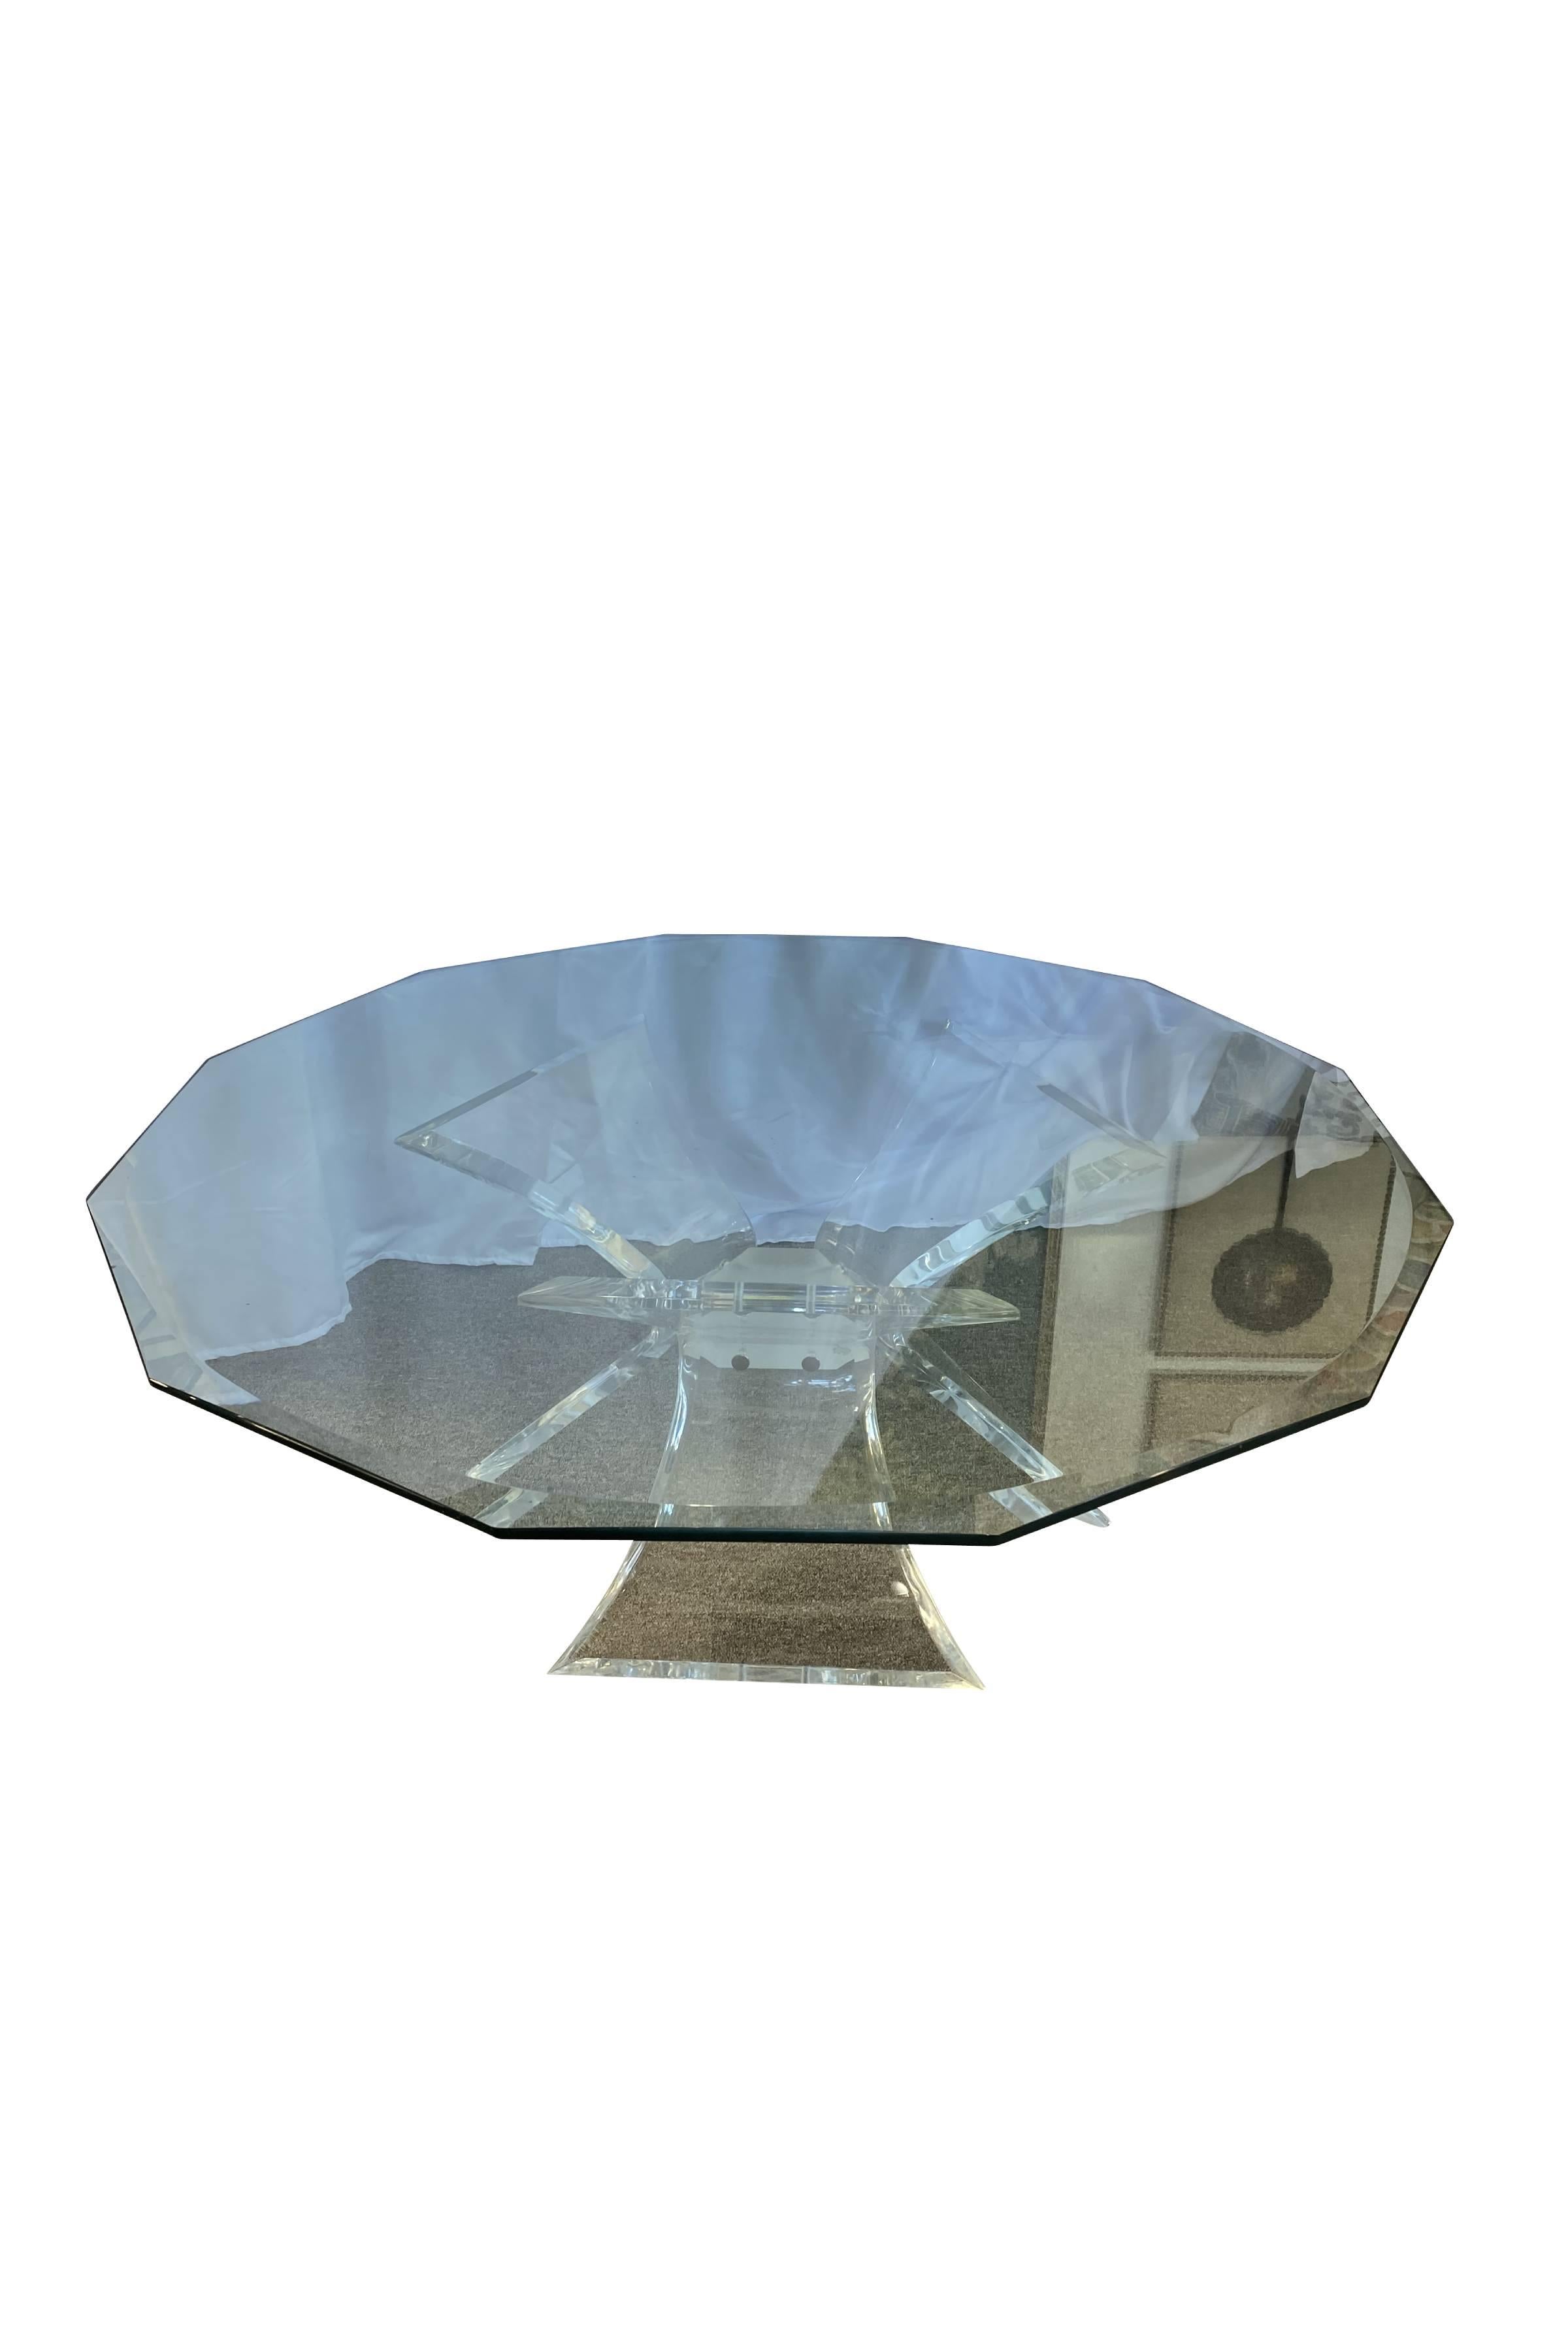 This unique coffee table features an modern Lucite base where three curved hourglass shaped legs support the octagonal, beveled glass top. The glass top allows an unobstructed view of the table’s unique and balanced base construct.